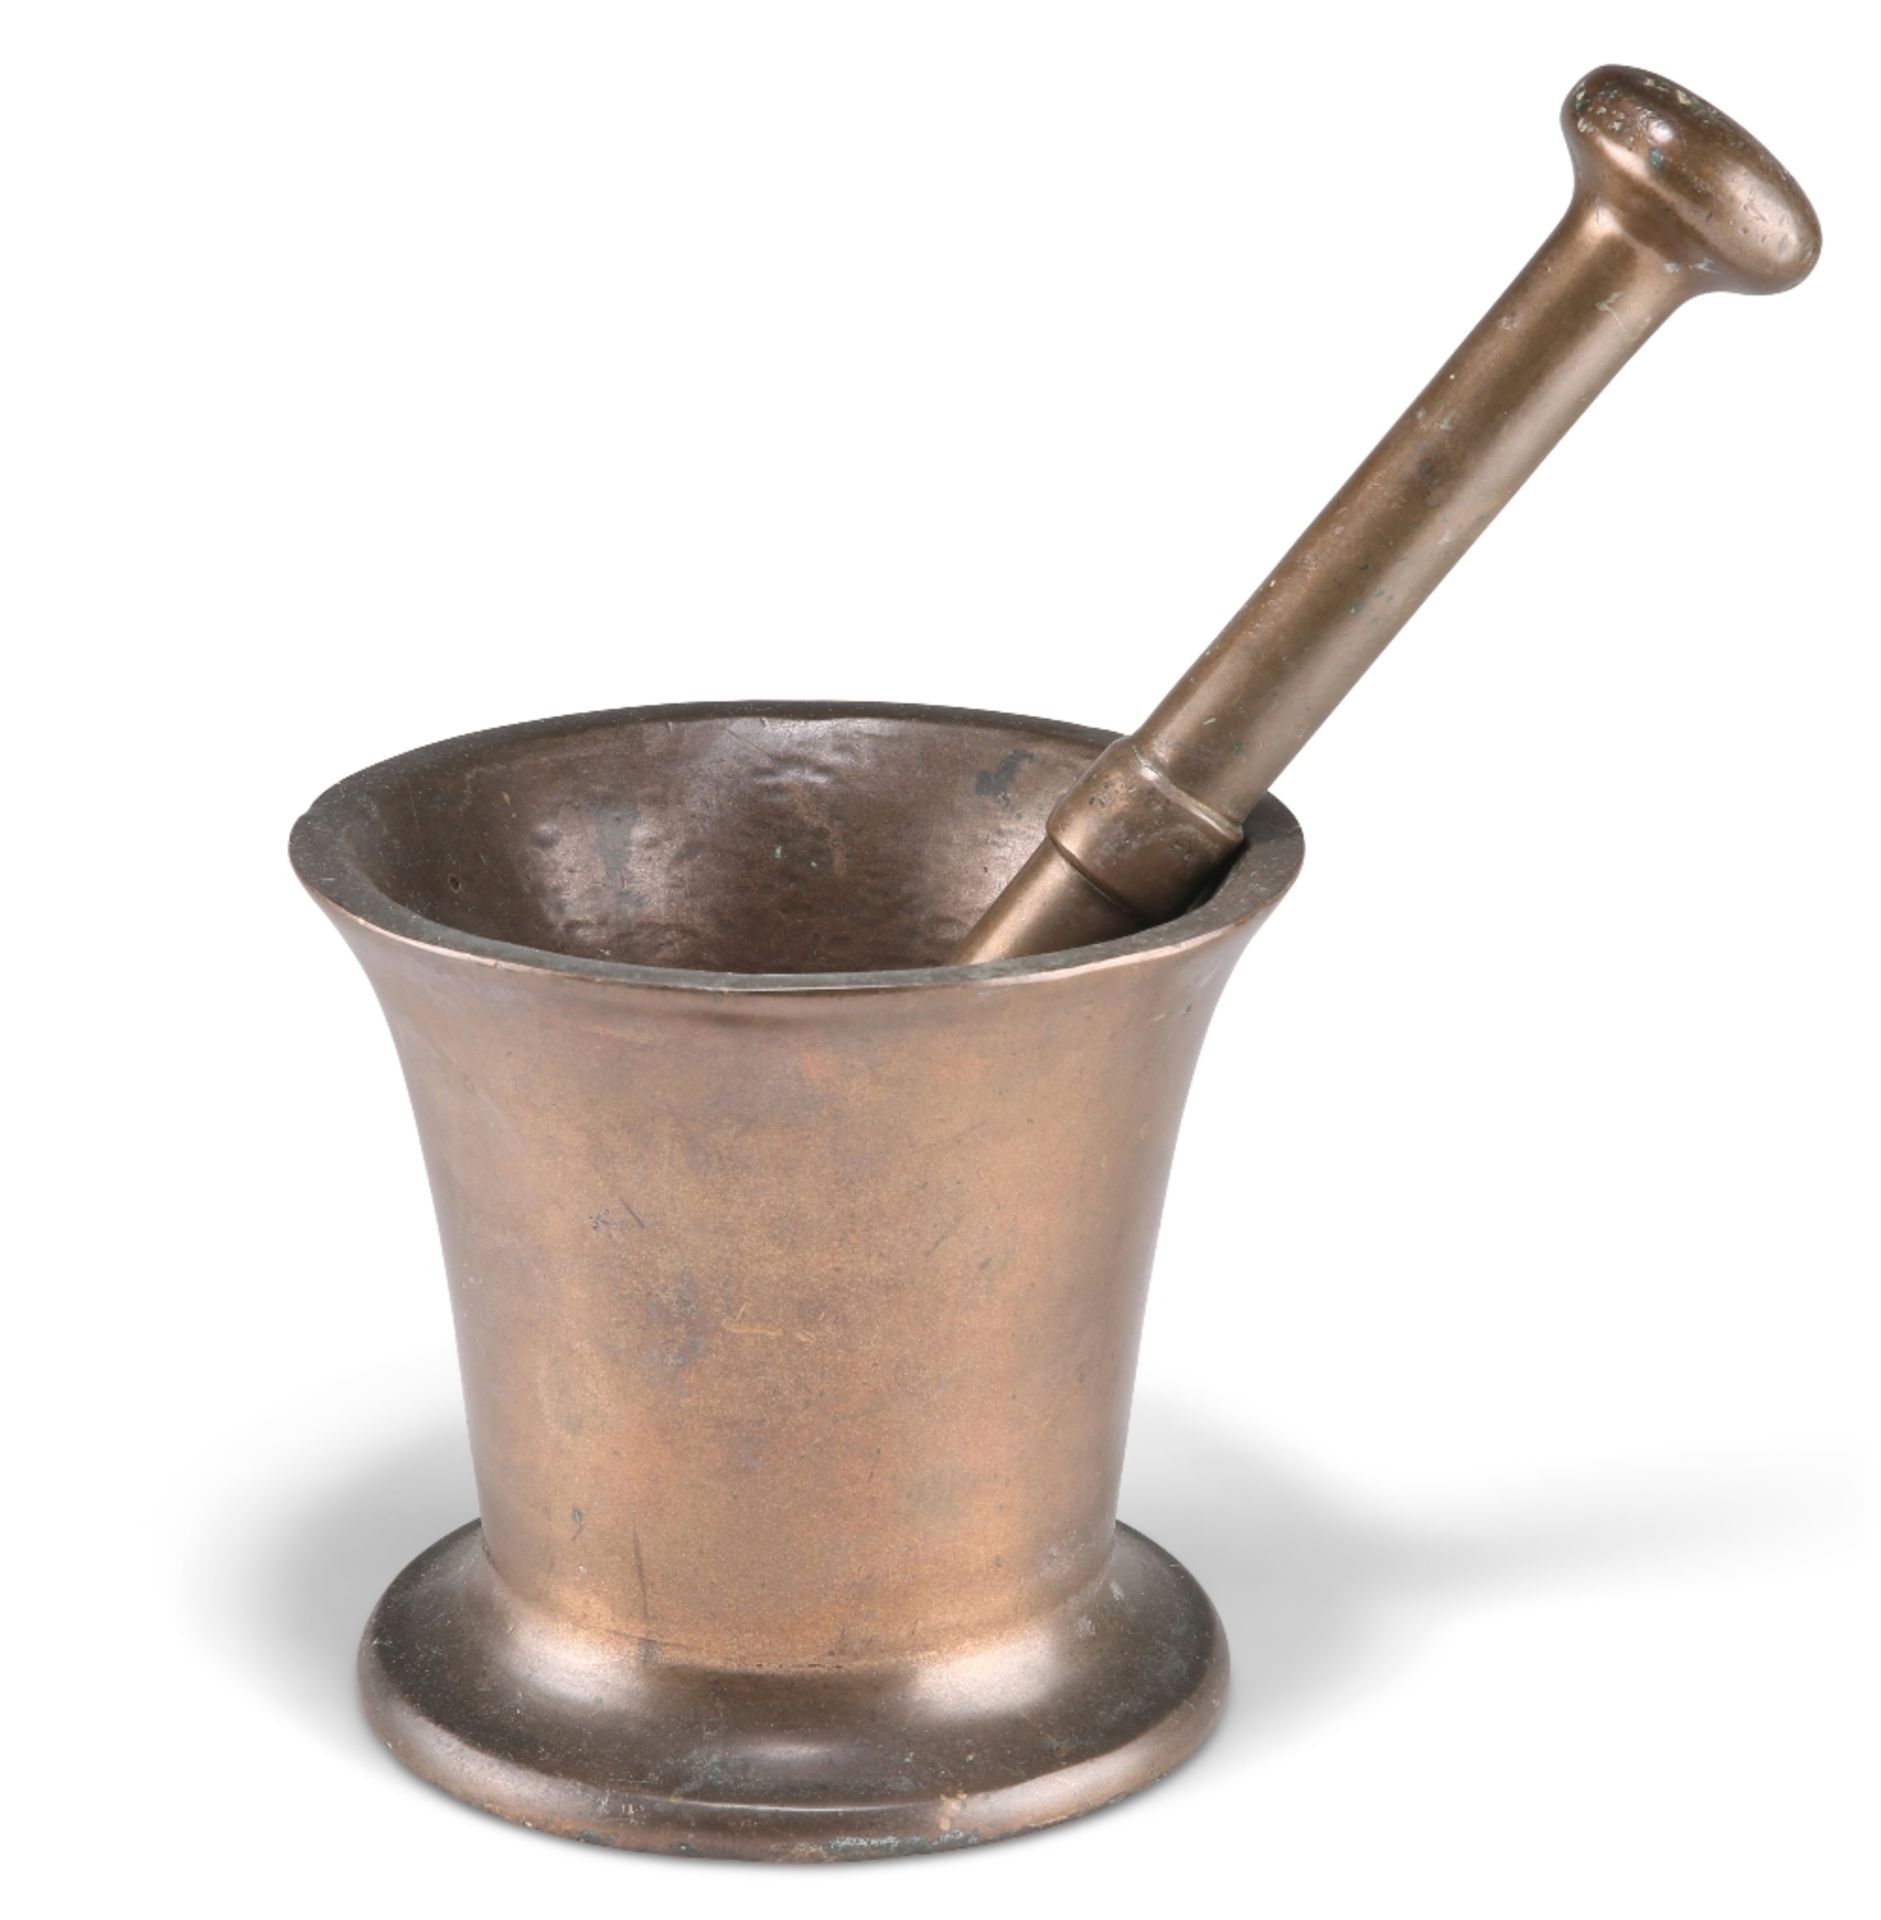 A BRONZE APOTHECARY PESTLE AND MORTAR, typical form with flared rim, the pestle double ended. Mortar